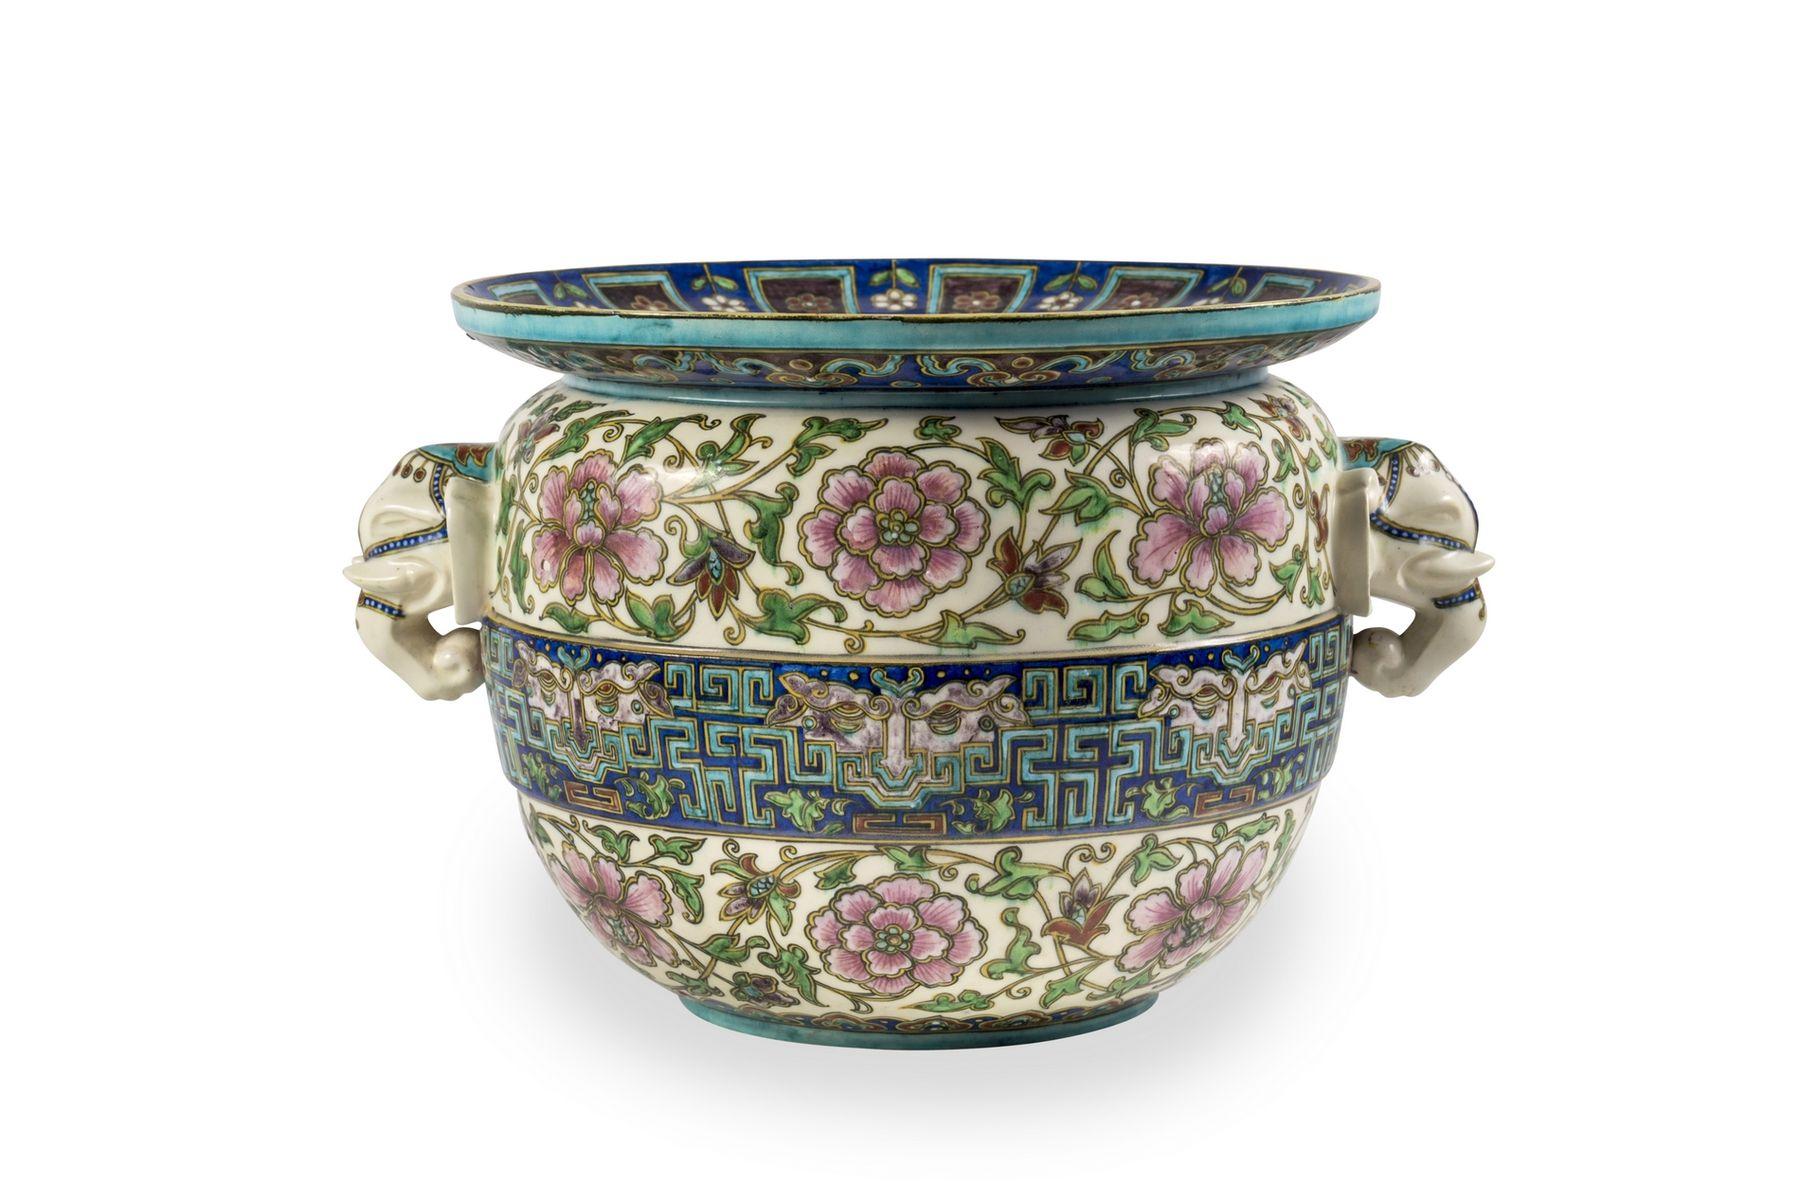 Enameled Planter with elephant handles by Théodore Deck, circa 1870 For Sale